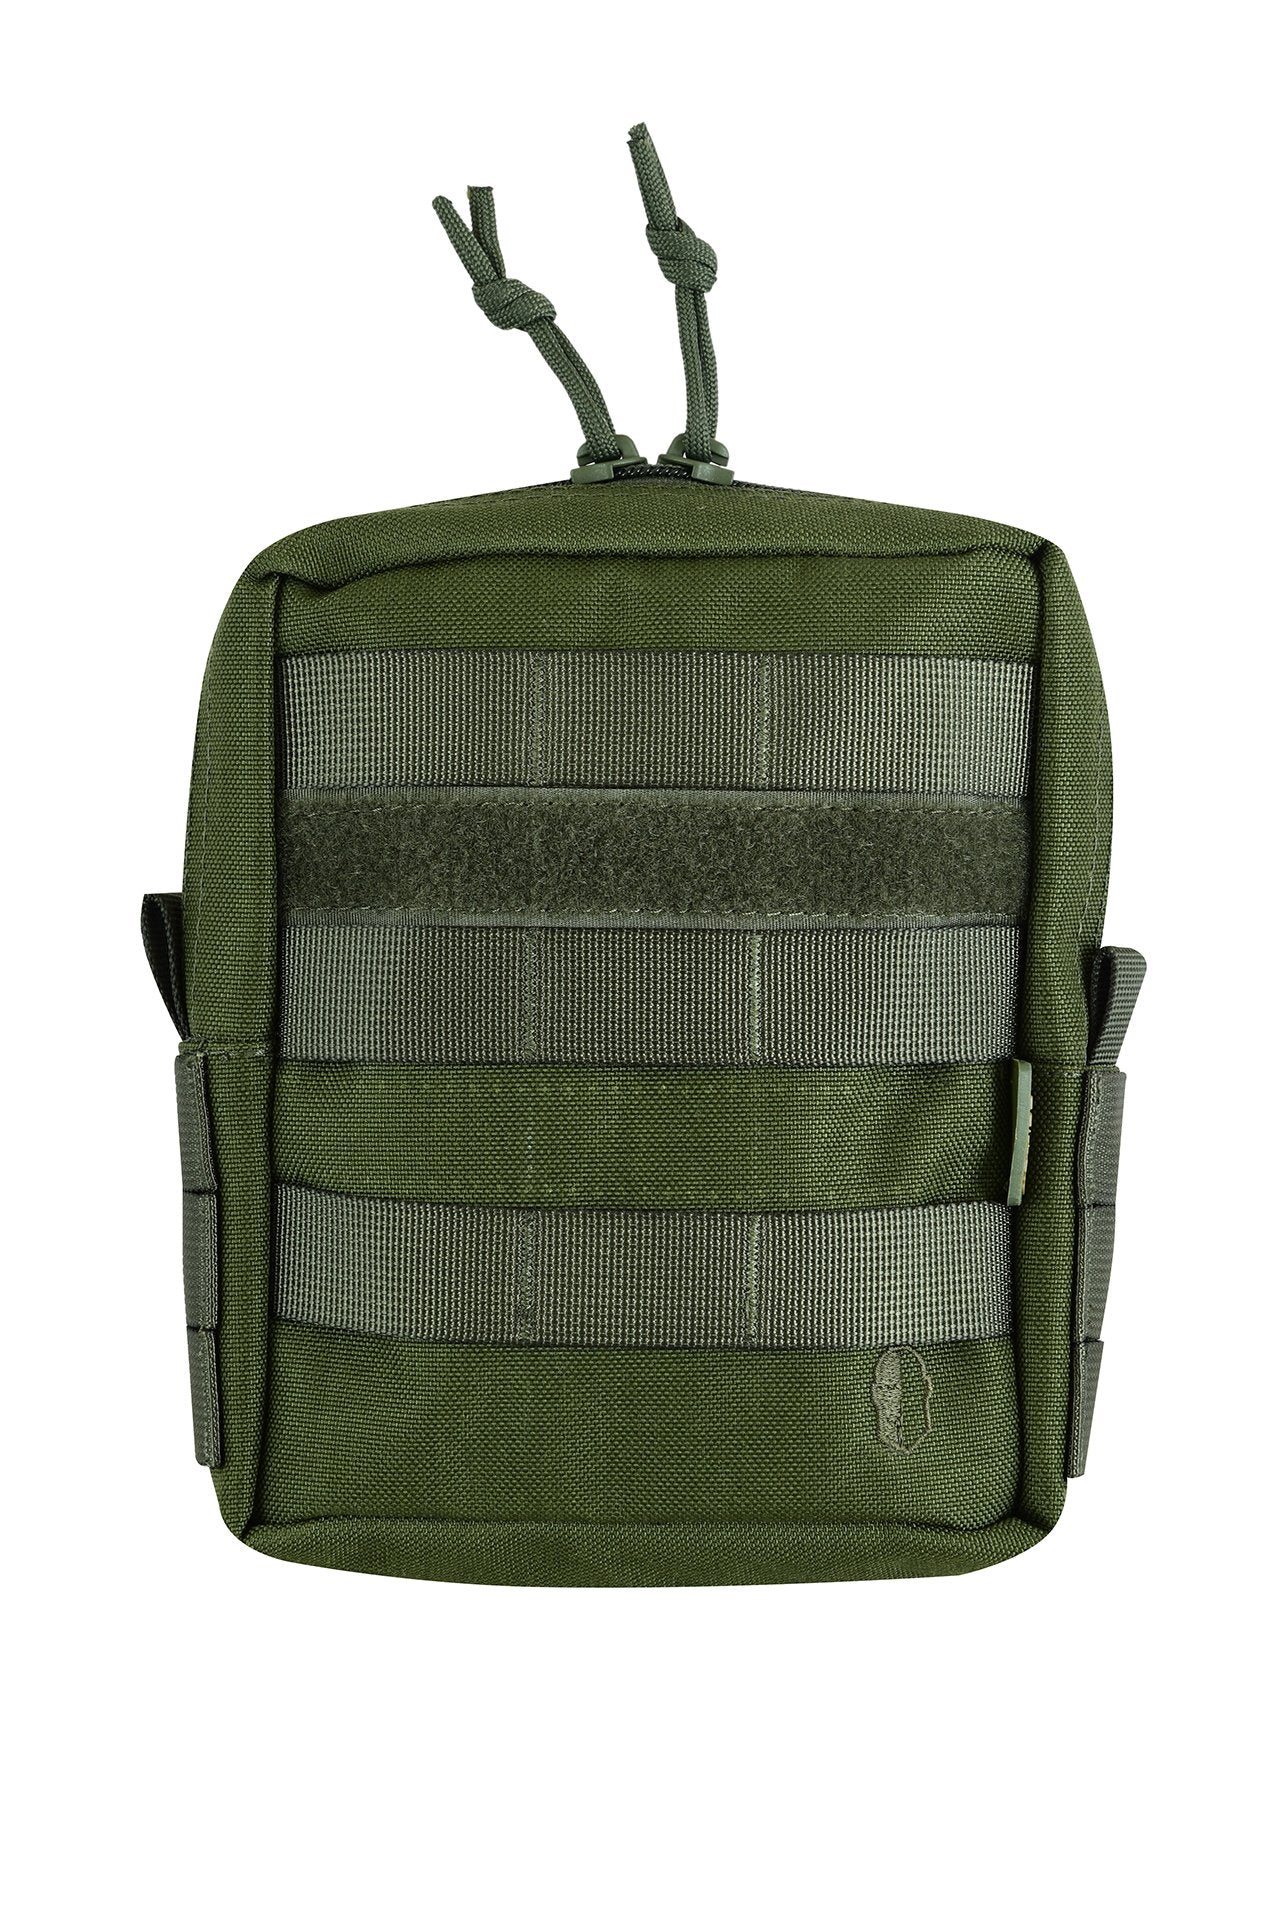 SHE-23034 MEDIUM UTILITY POUCH OLIVE GREEN